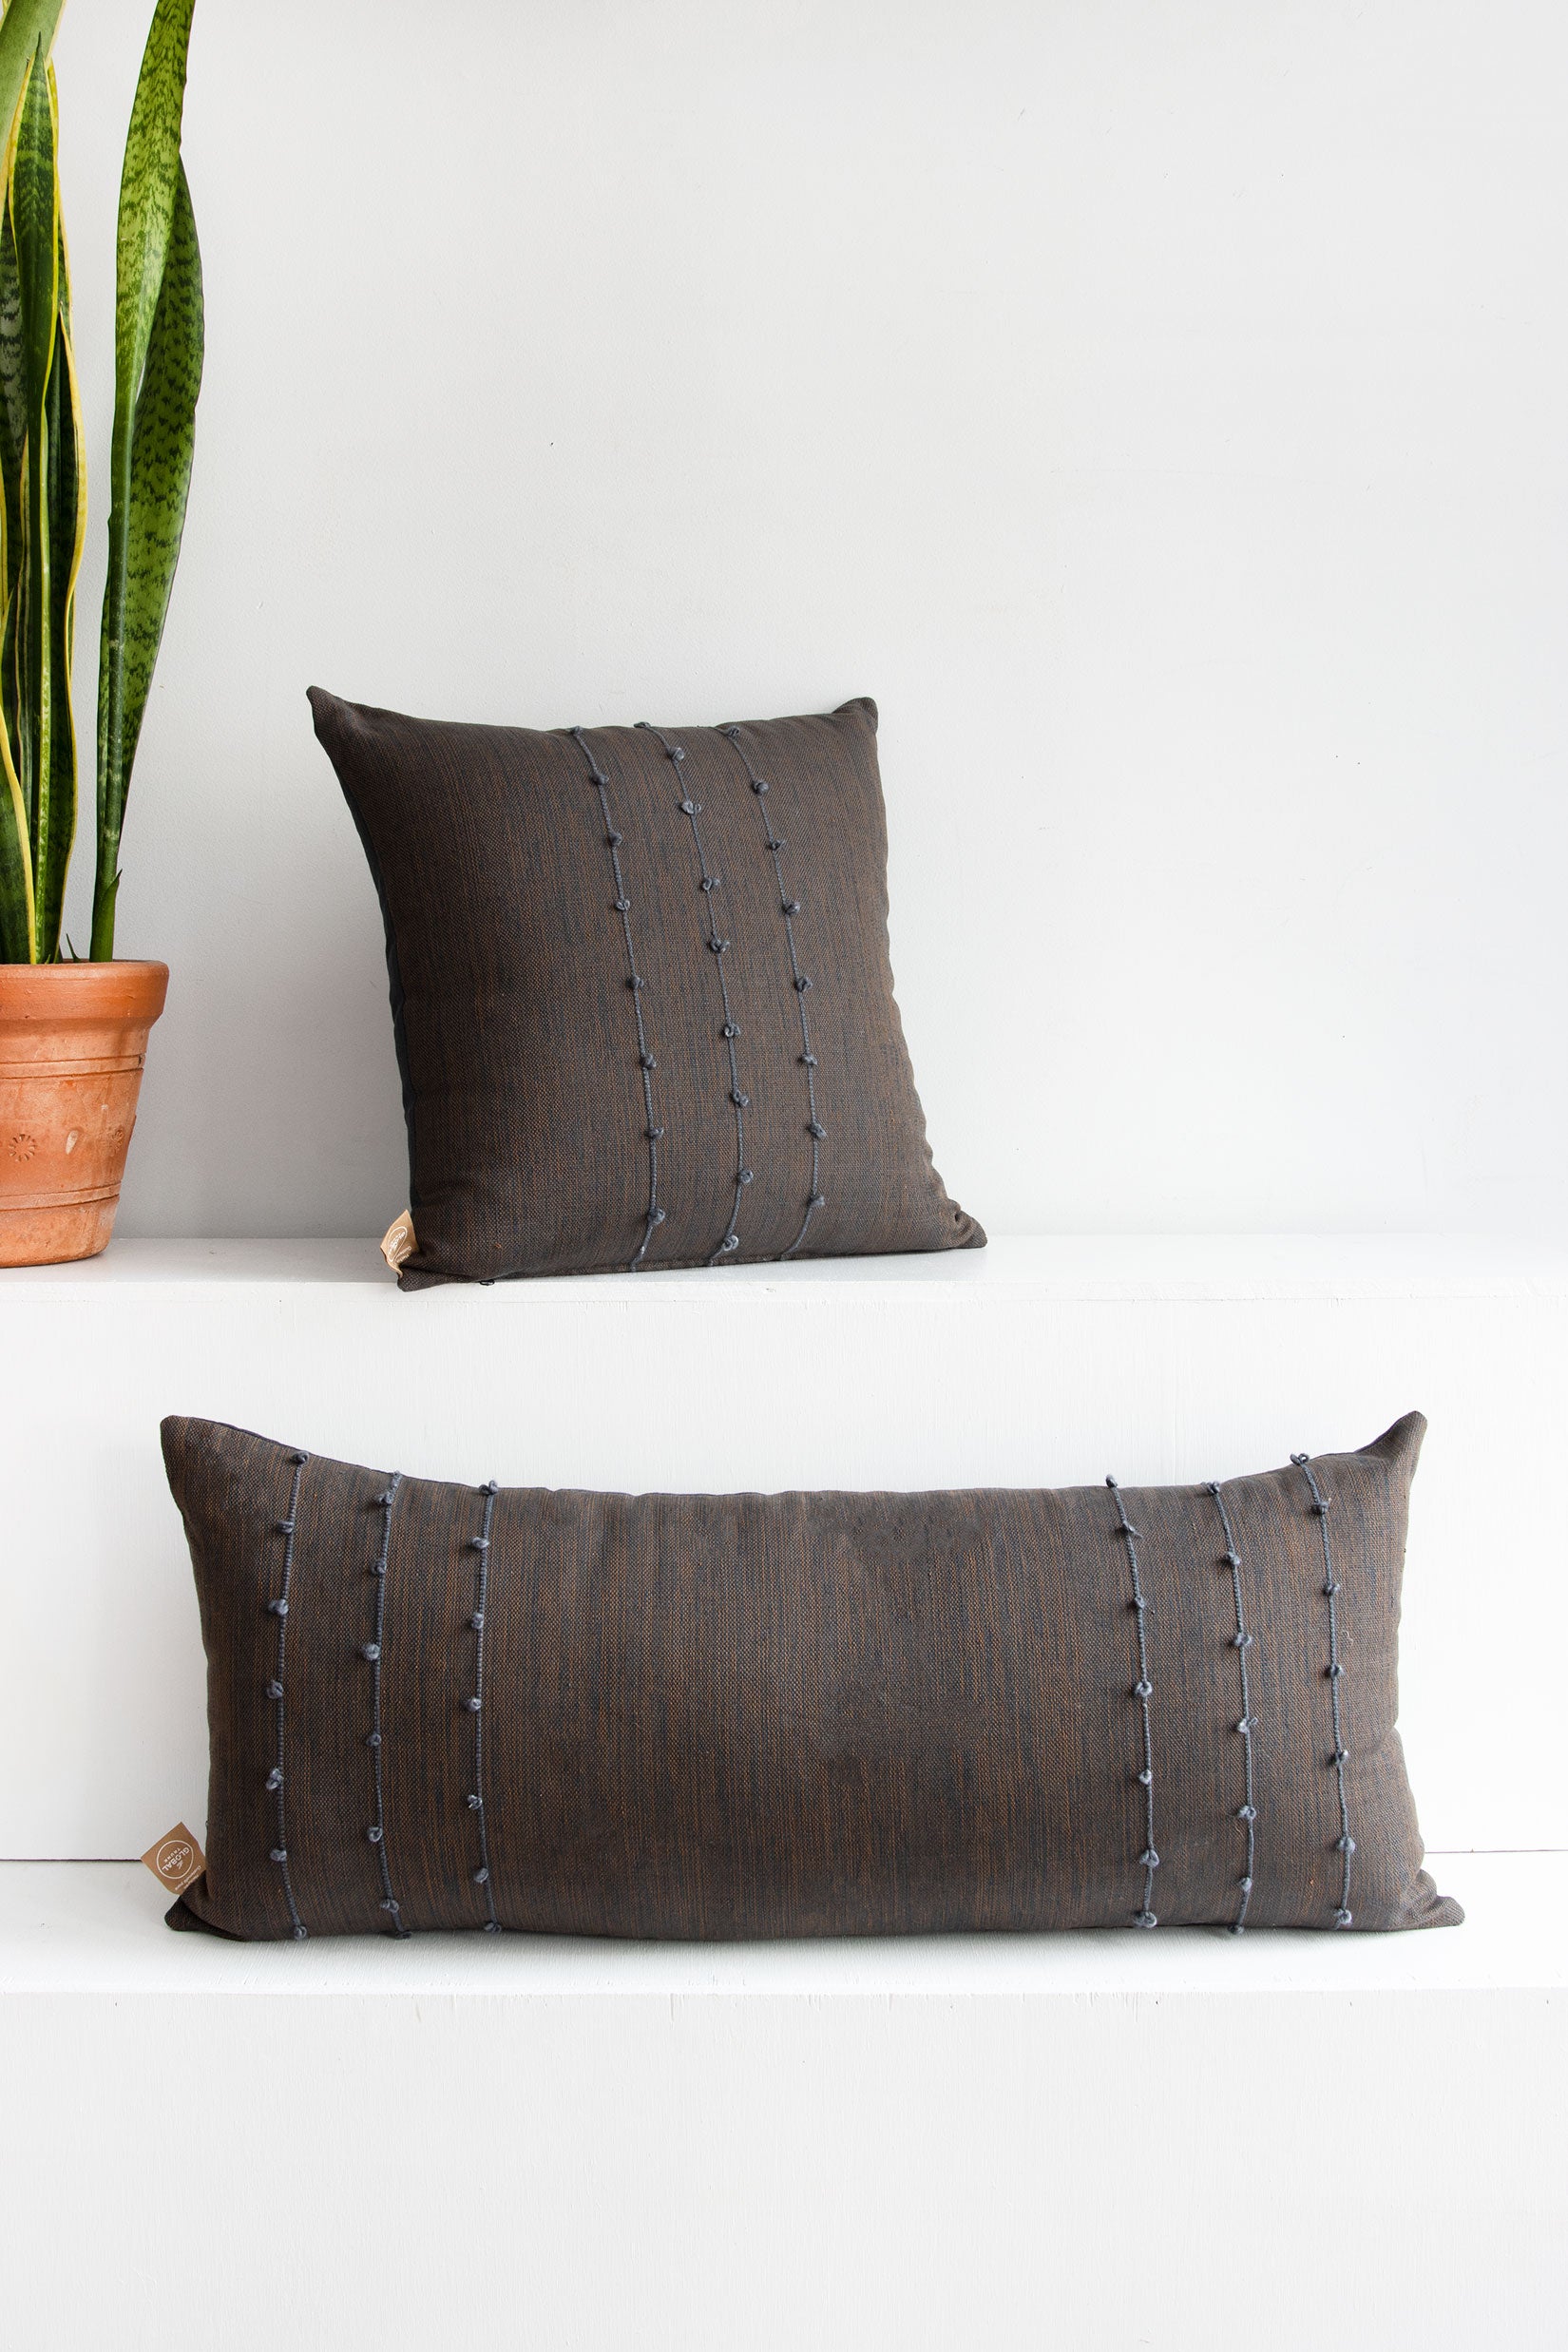 Two dark brown tight woven pillows in different shapes with small grey pom poms arranged along three vertical grey lines stretching across the pillows.